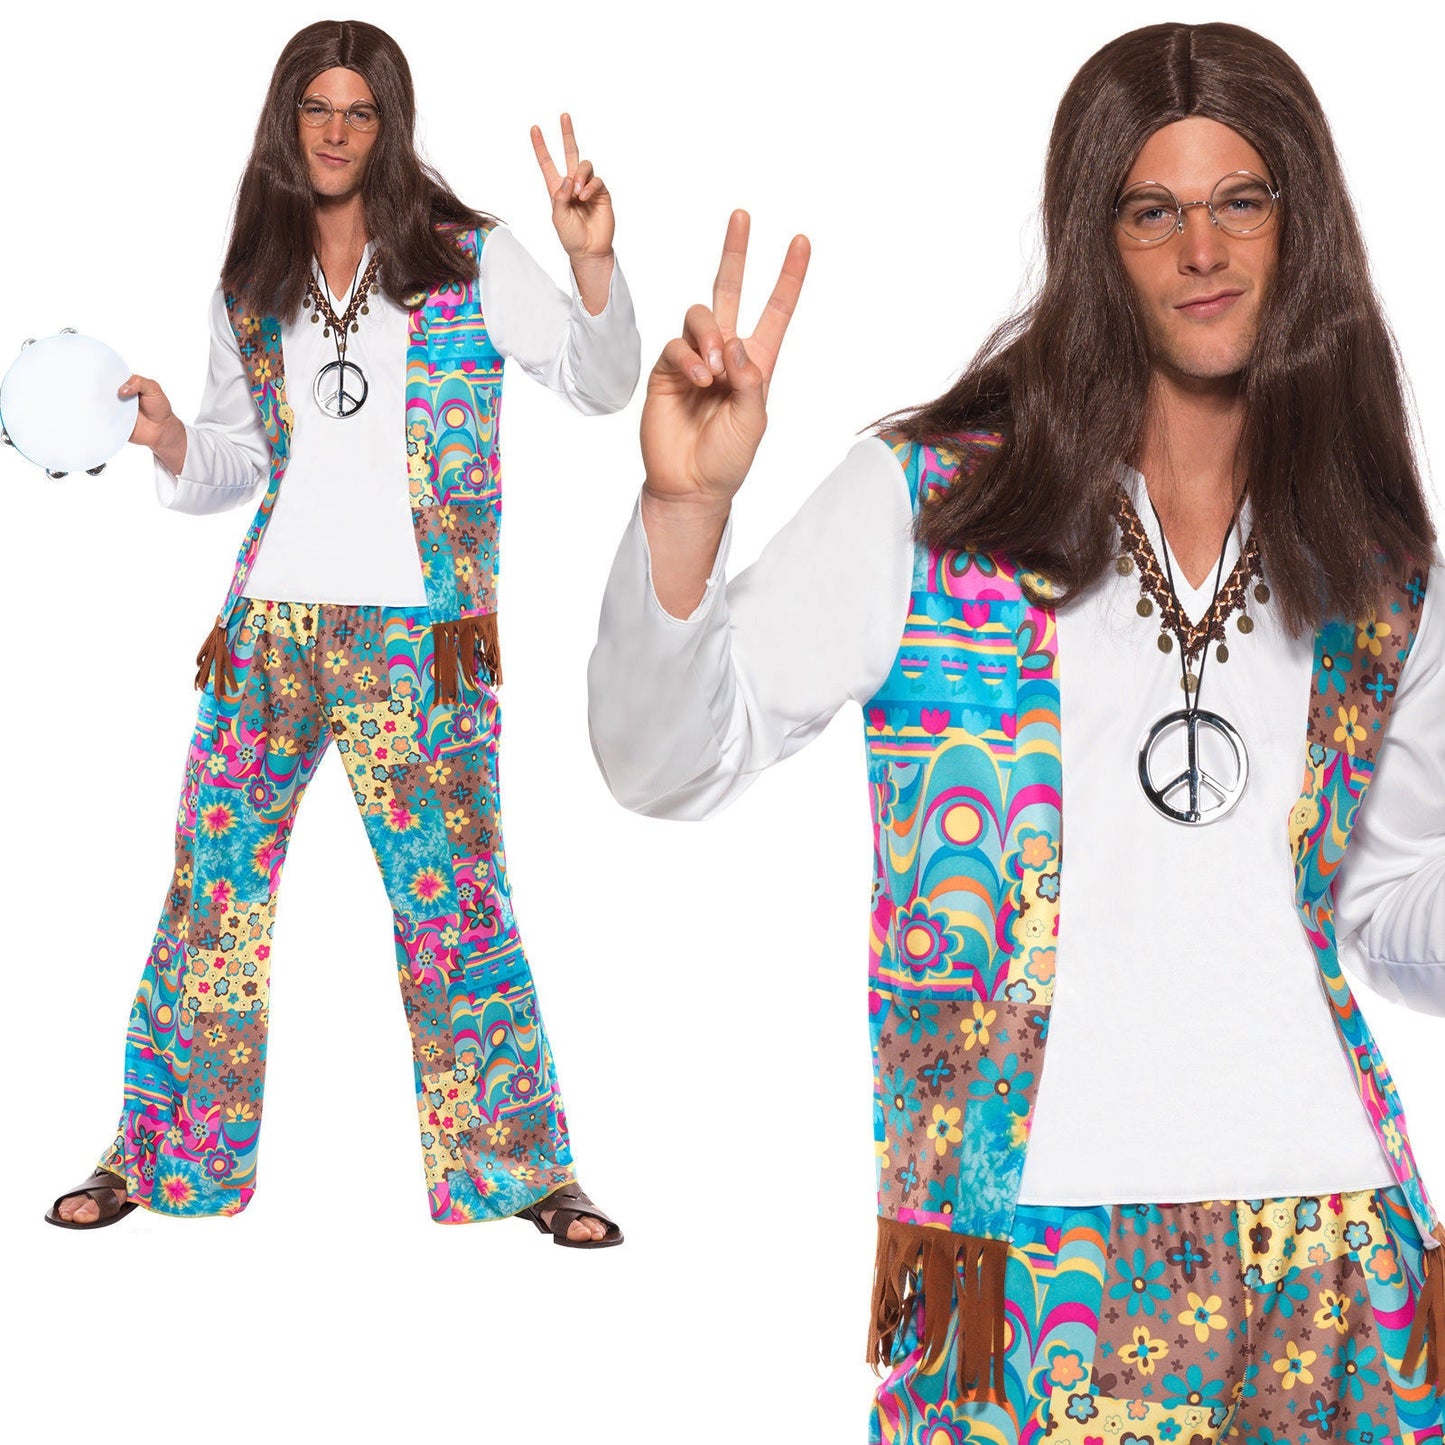 Groovy Hippie Mens Costume - on top promoted